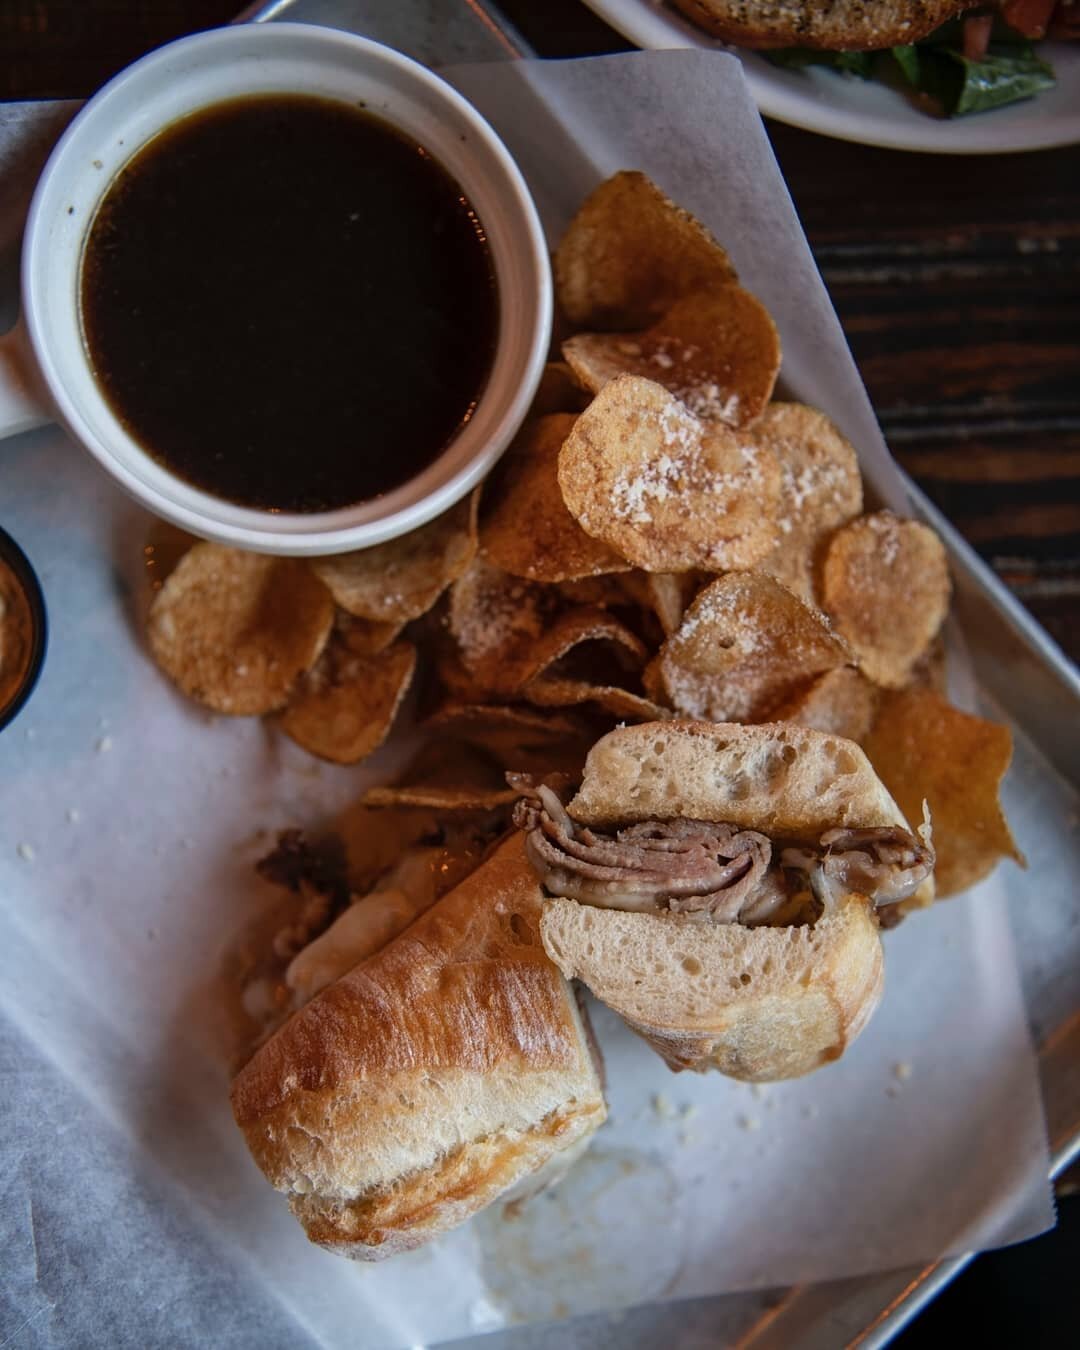 Enjoy signature sandwiches like our SOHA Dip tonight as we serve up all the tasty bangers from 4-11pm! Join us at the bar, in the dining room or on the patio!
​.
​ORDER ONLINE AT:https://www.toasttab.com/soha-bar-and-grill-2605-hampton-ave/v3/?mode=f